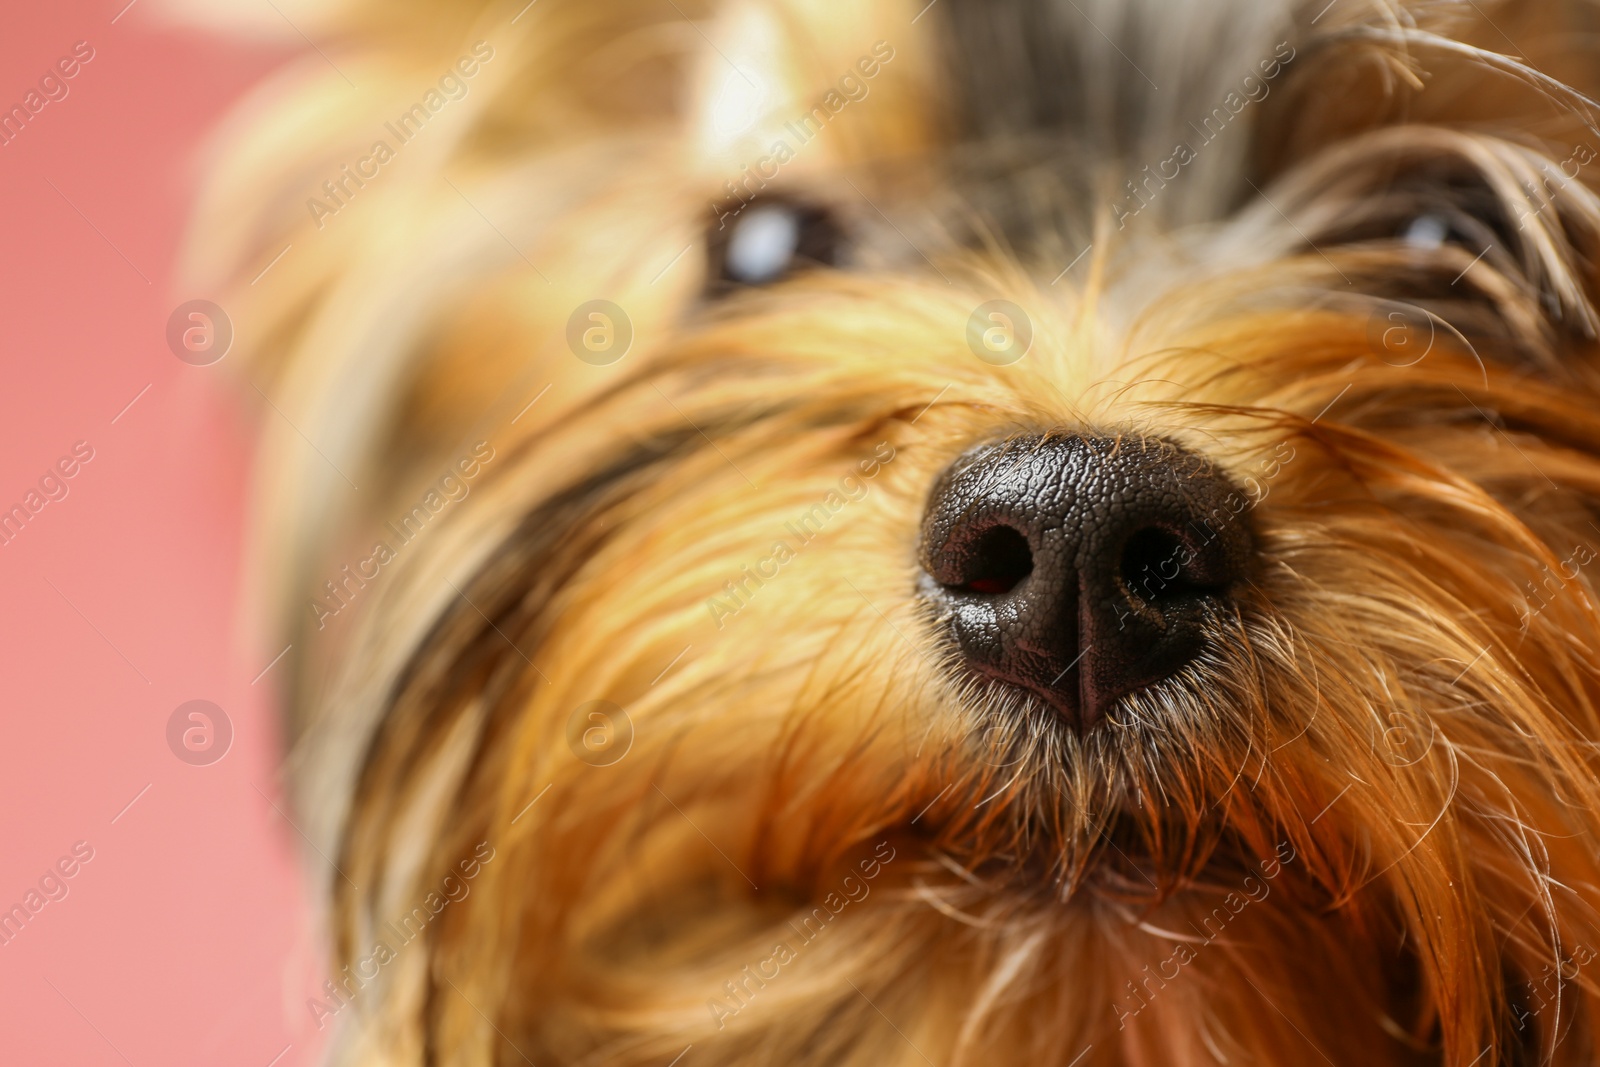 Photo of Adorable Yorkshire terrier on pink background, focus on nose. Cute dog